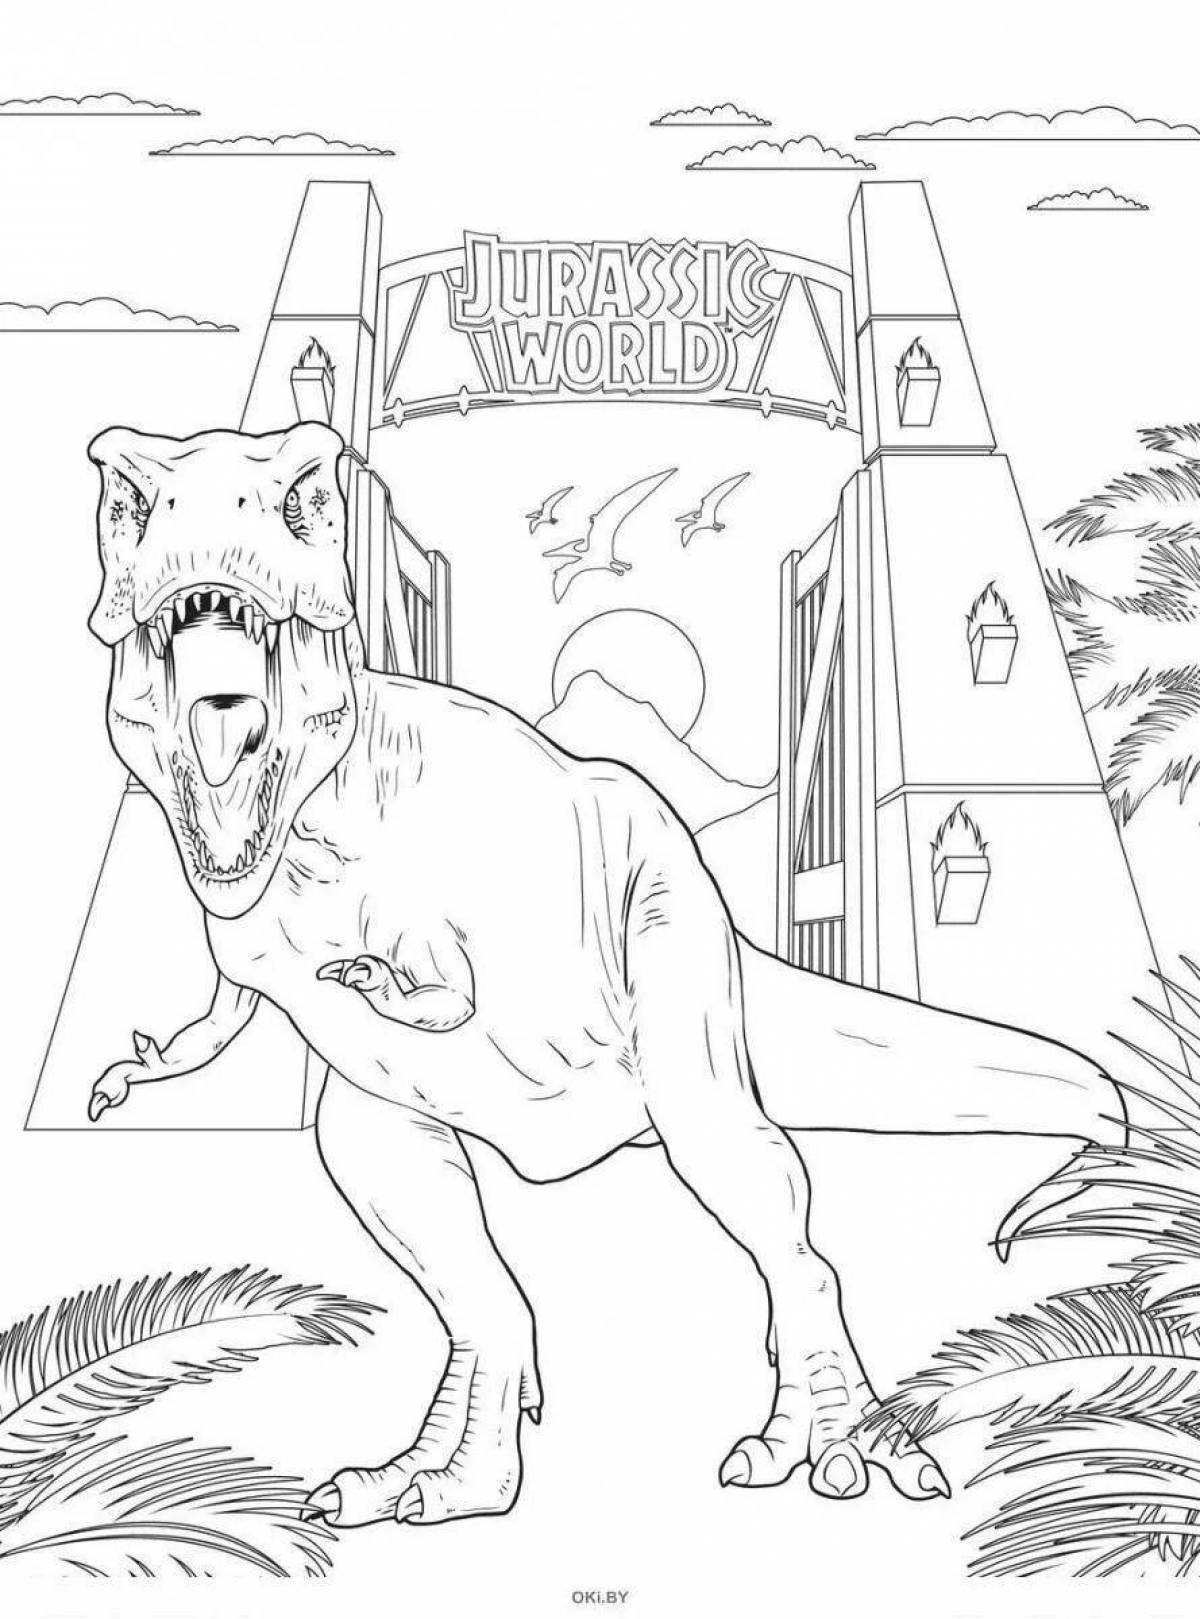 Majestic jurassic world domination coloring page